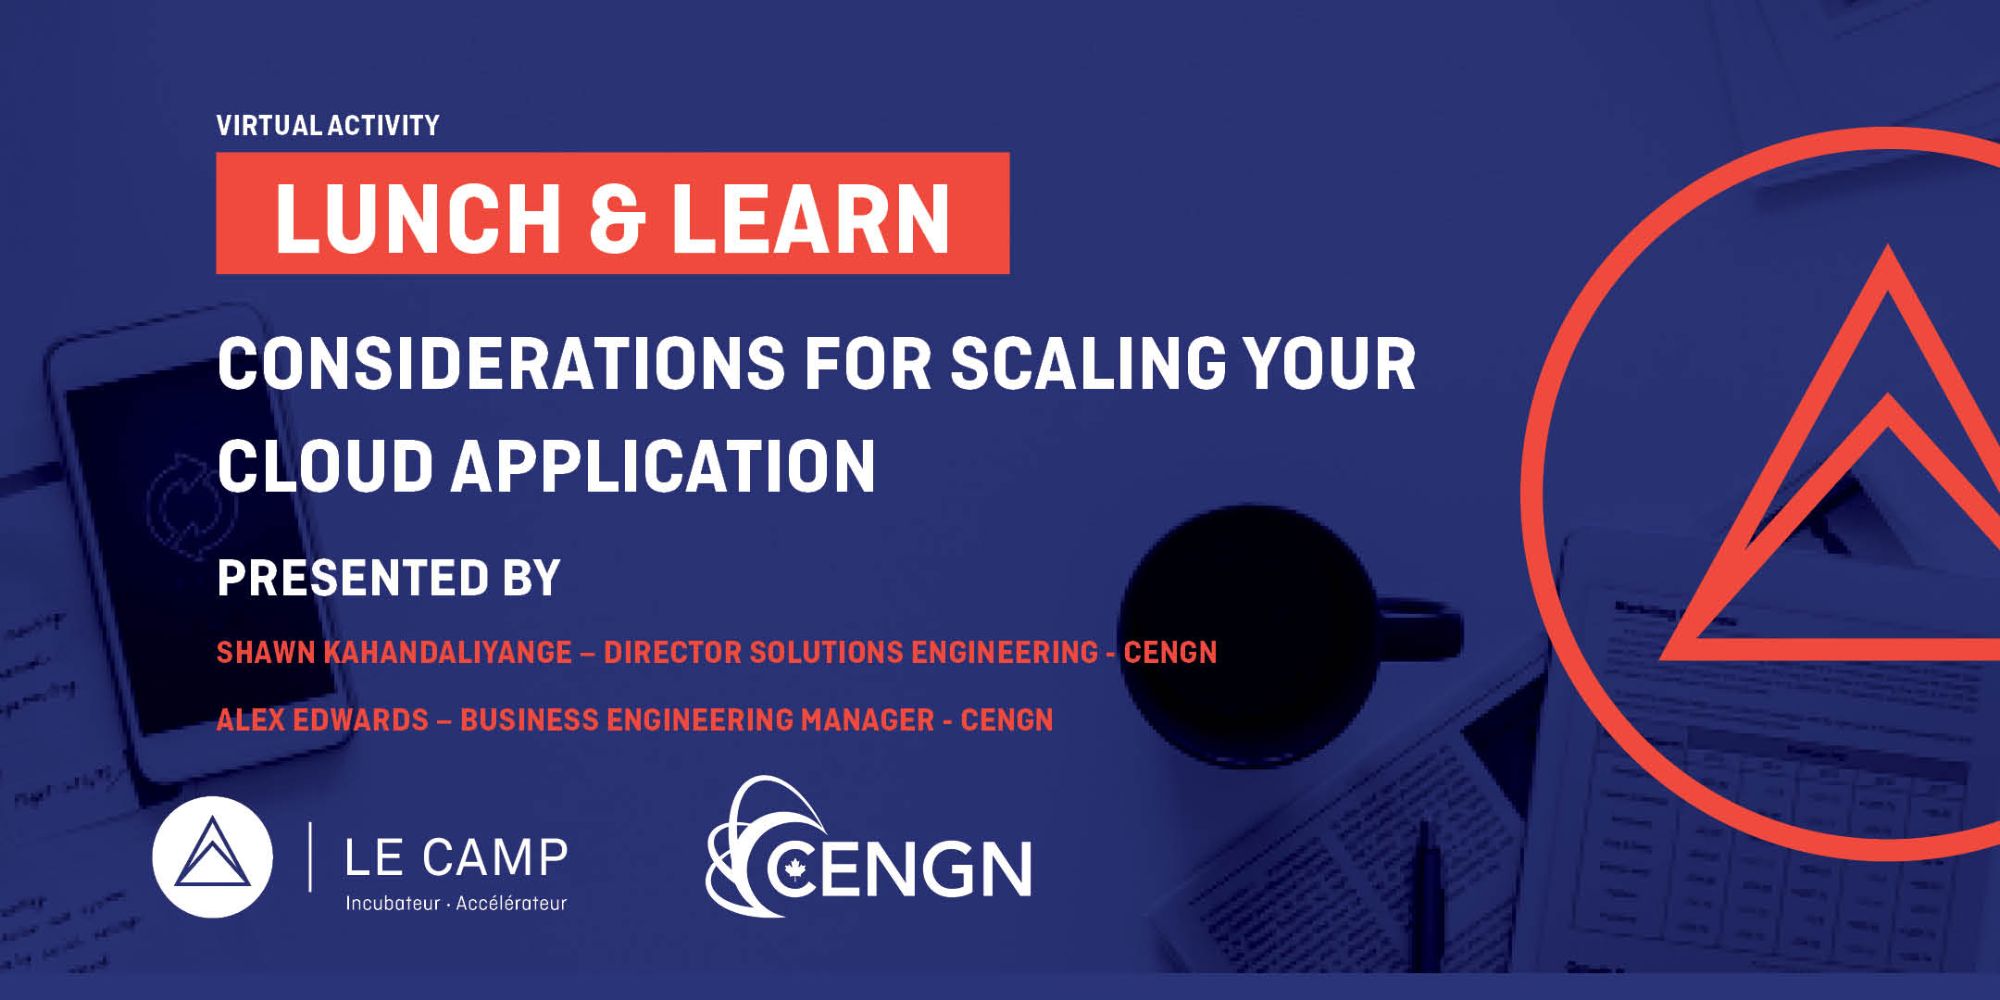 Lunch & Learn - Considerations for Scaling your Cloud Application